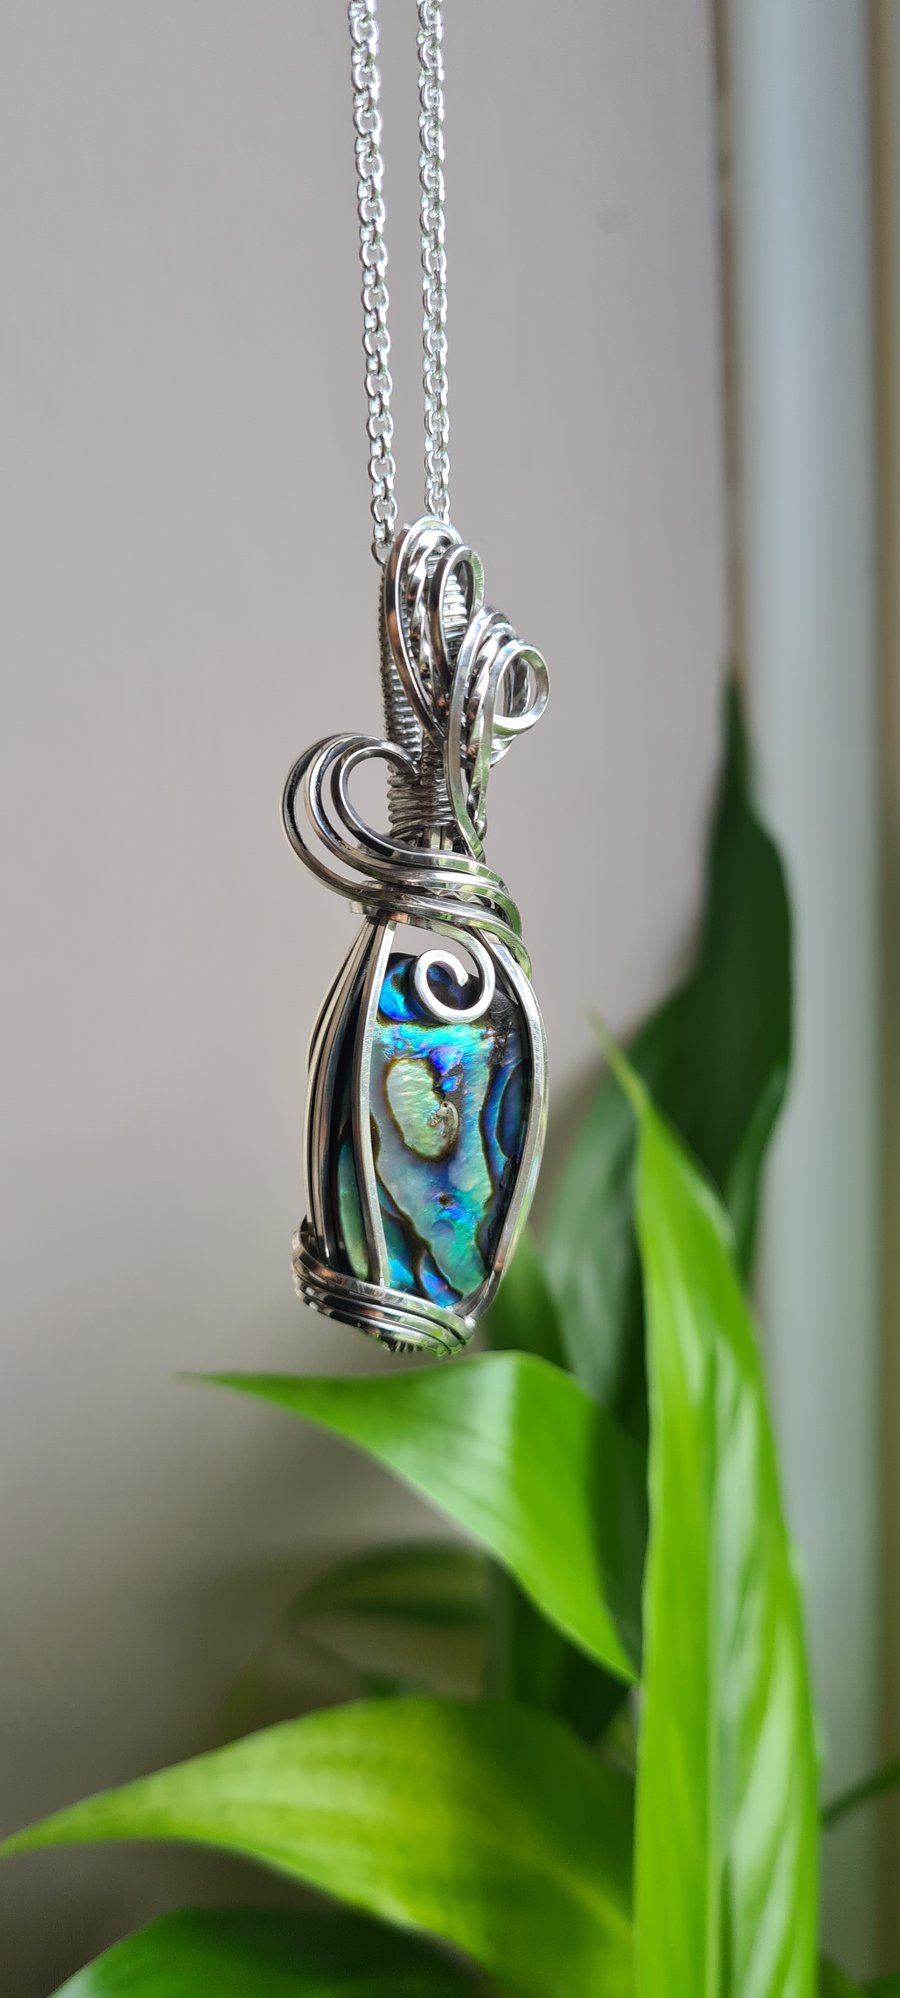 Handmade Natural Abalone Shell 925 Silver Necklace Pendant Gift Boxed Jewellery